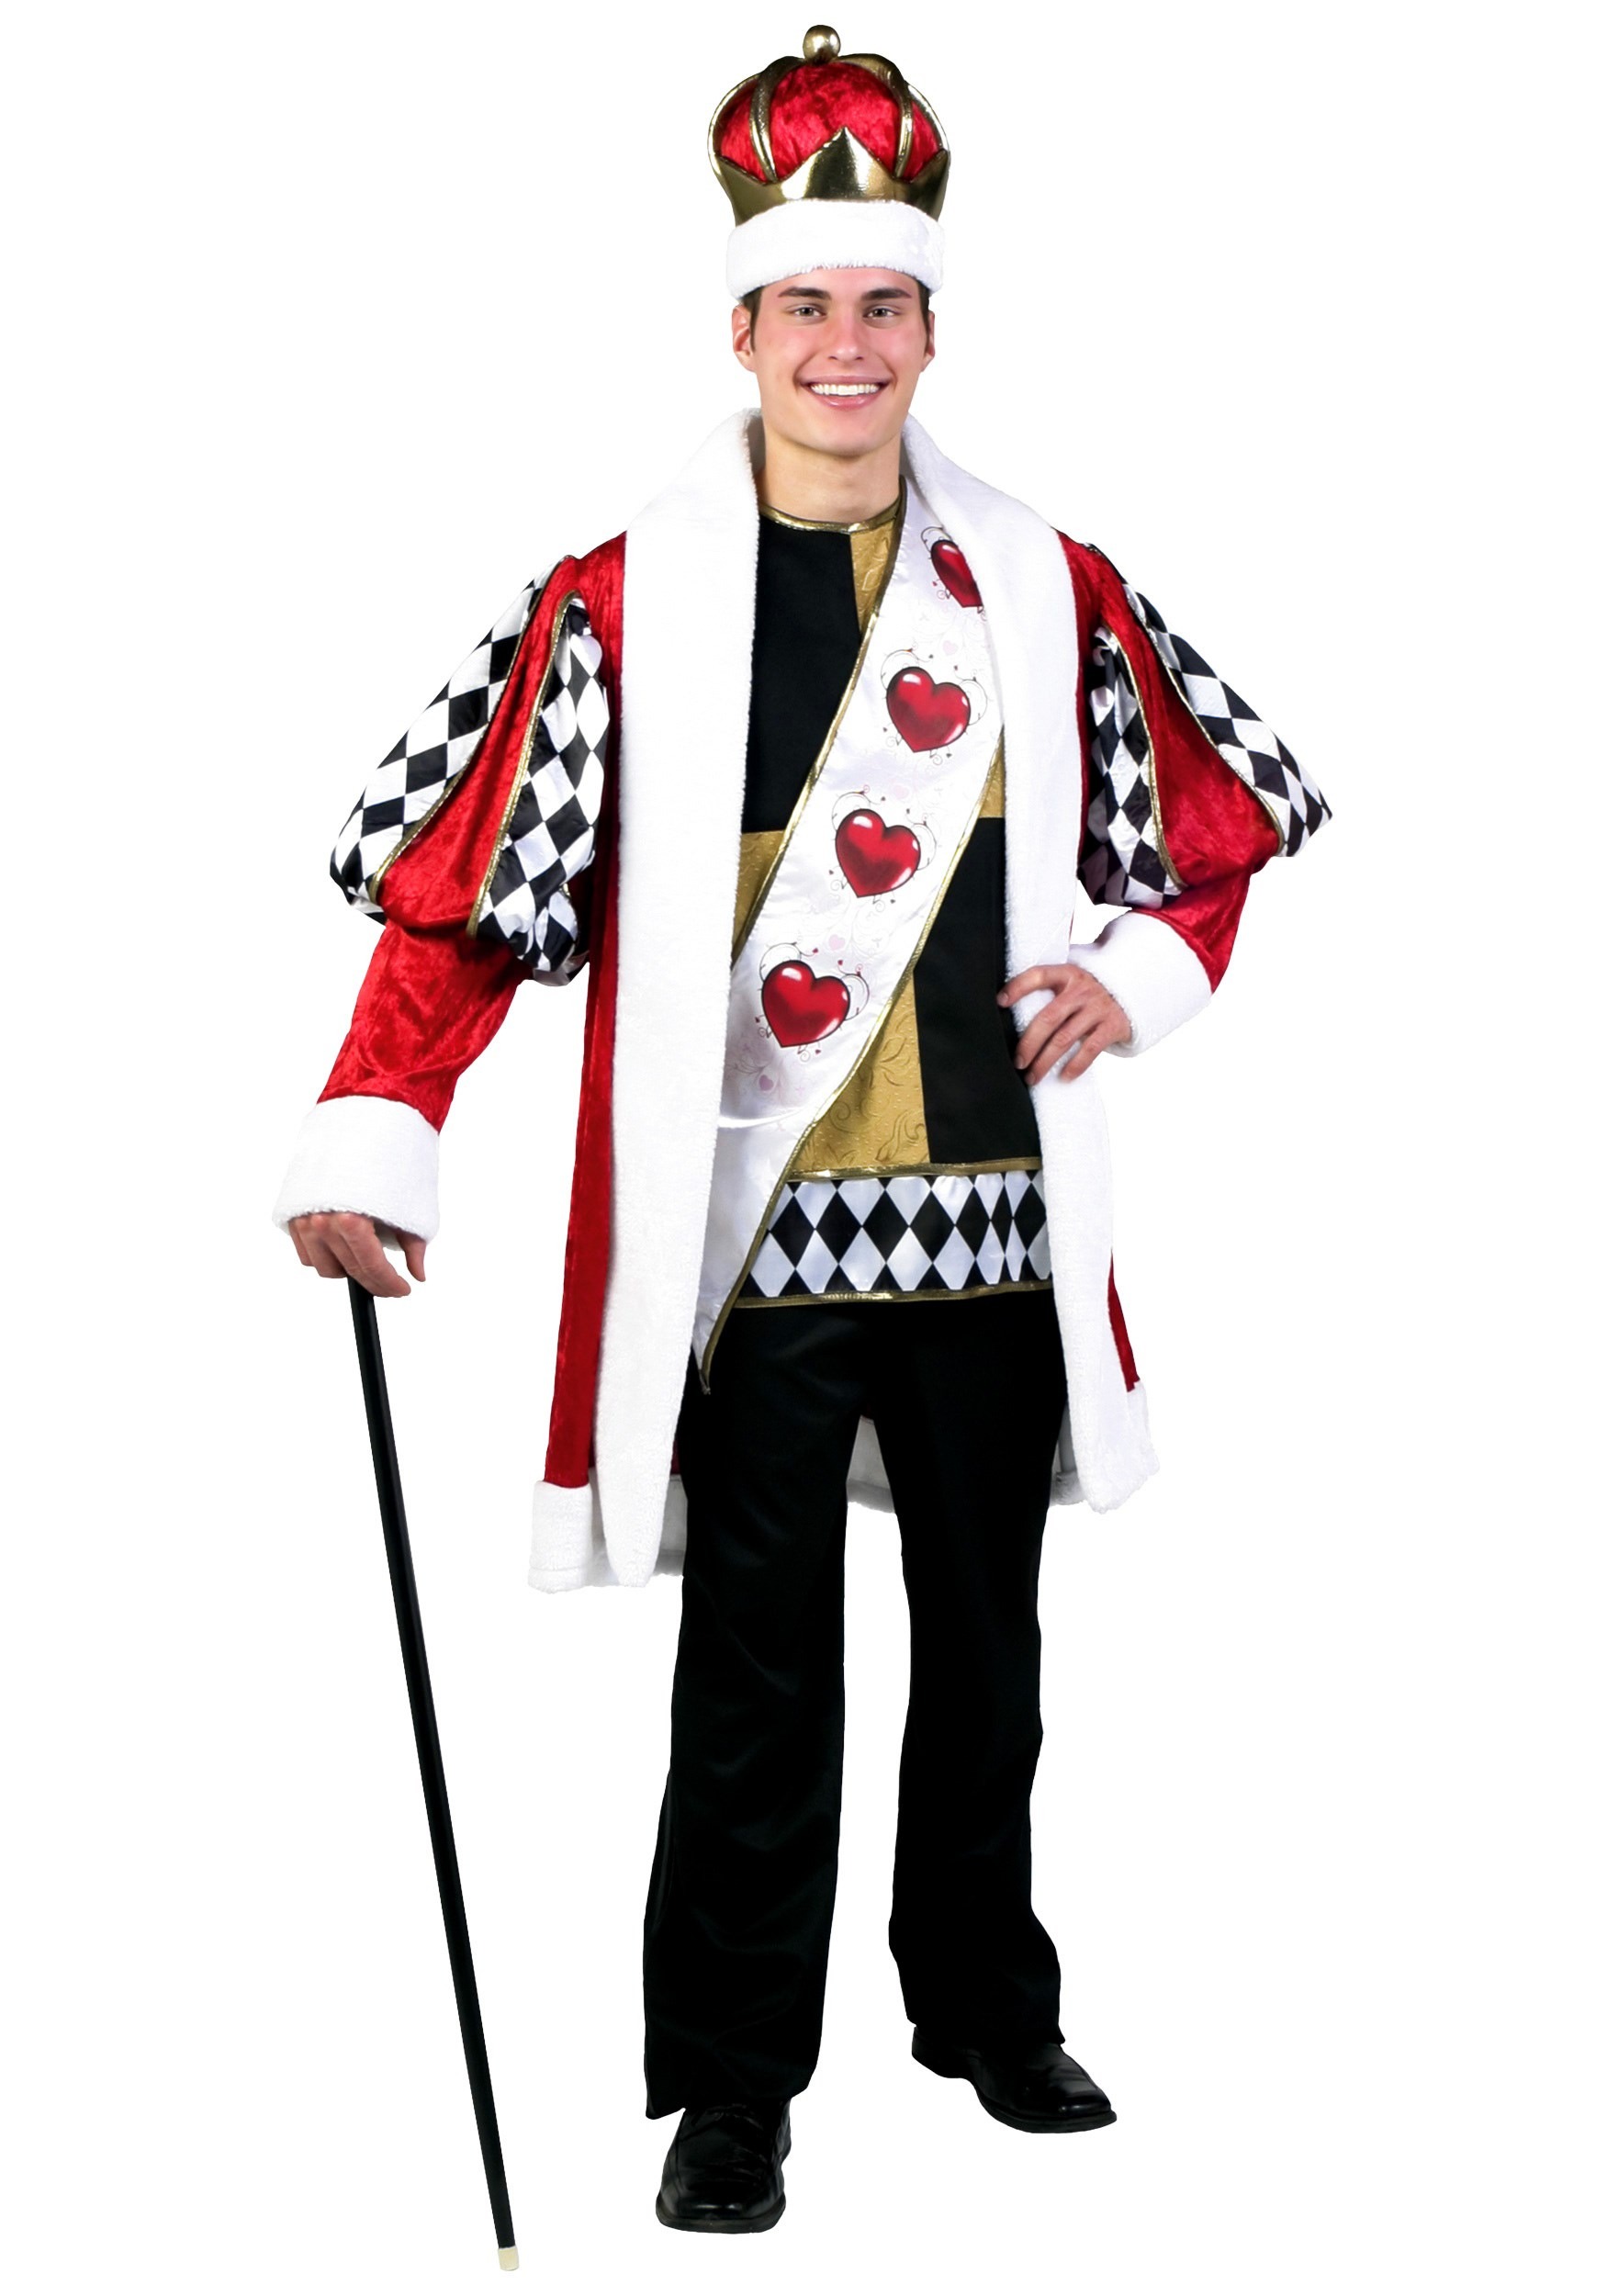 Photos - Fancy Dress Deluxe FUN Costumes  King of Hearts Men's Costume Black/Red/White F 